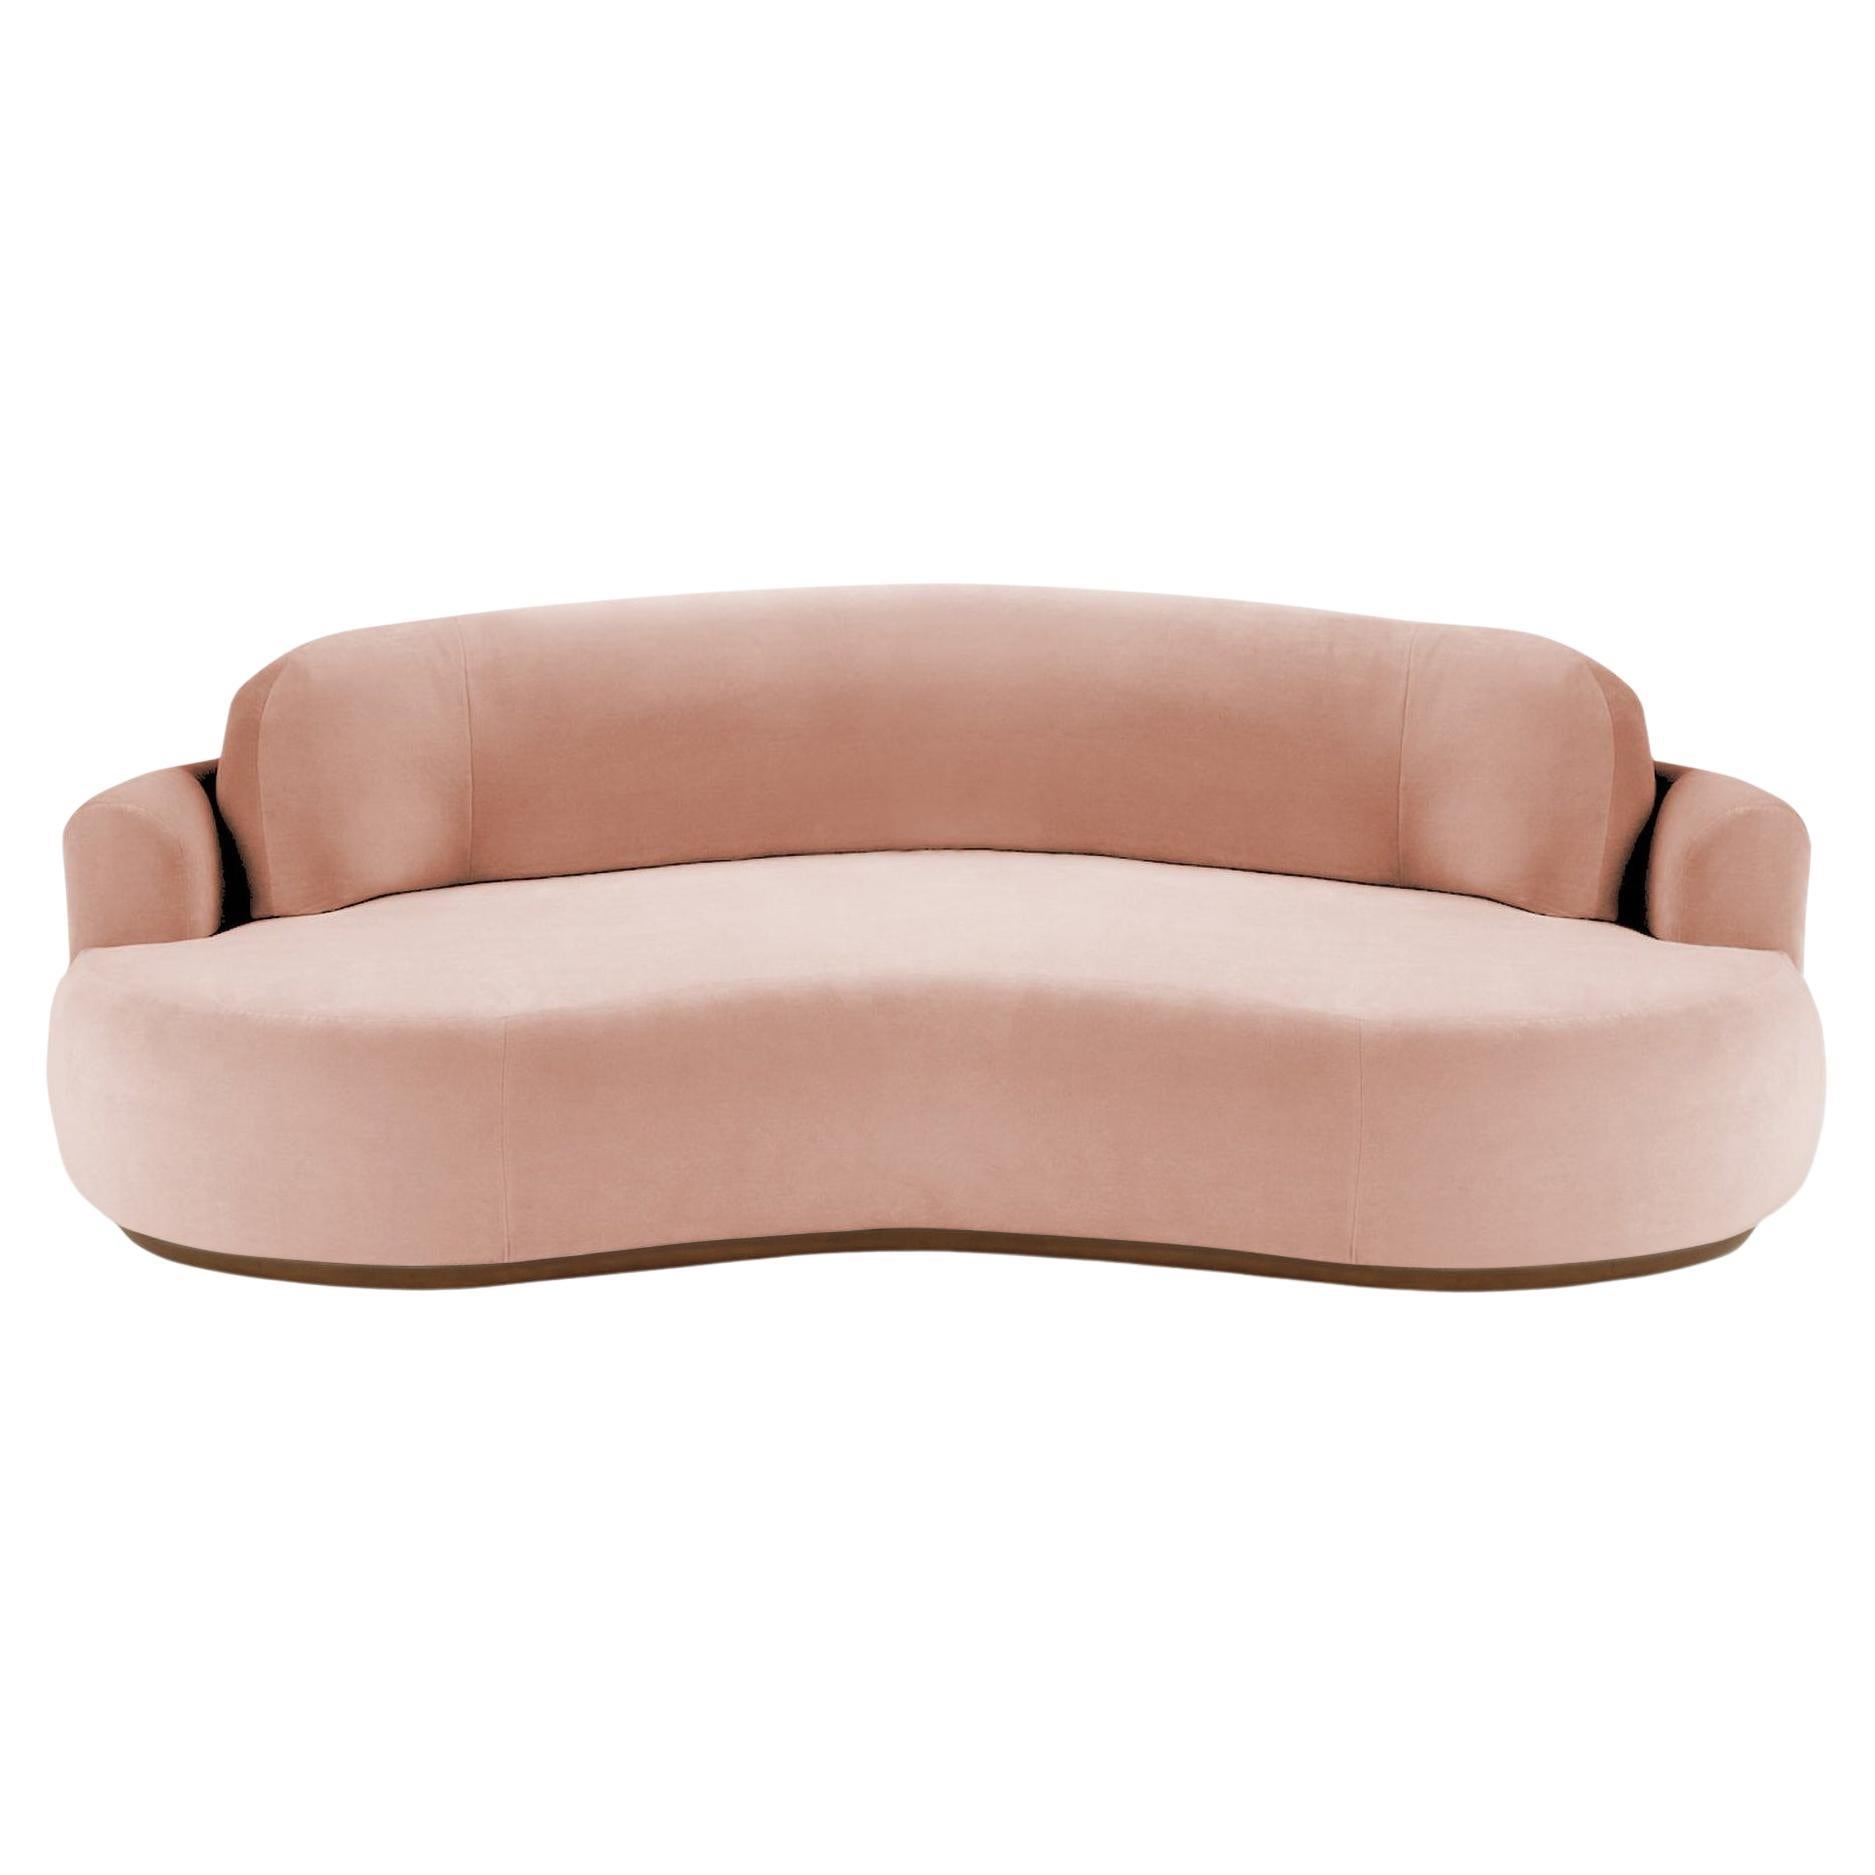 Naked Curved Sofa, Large with Beech Ash-056-1 and Vigo Blossom